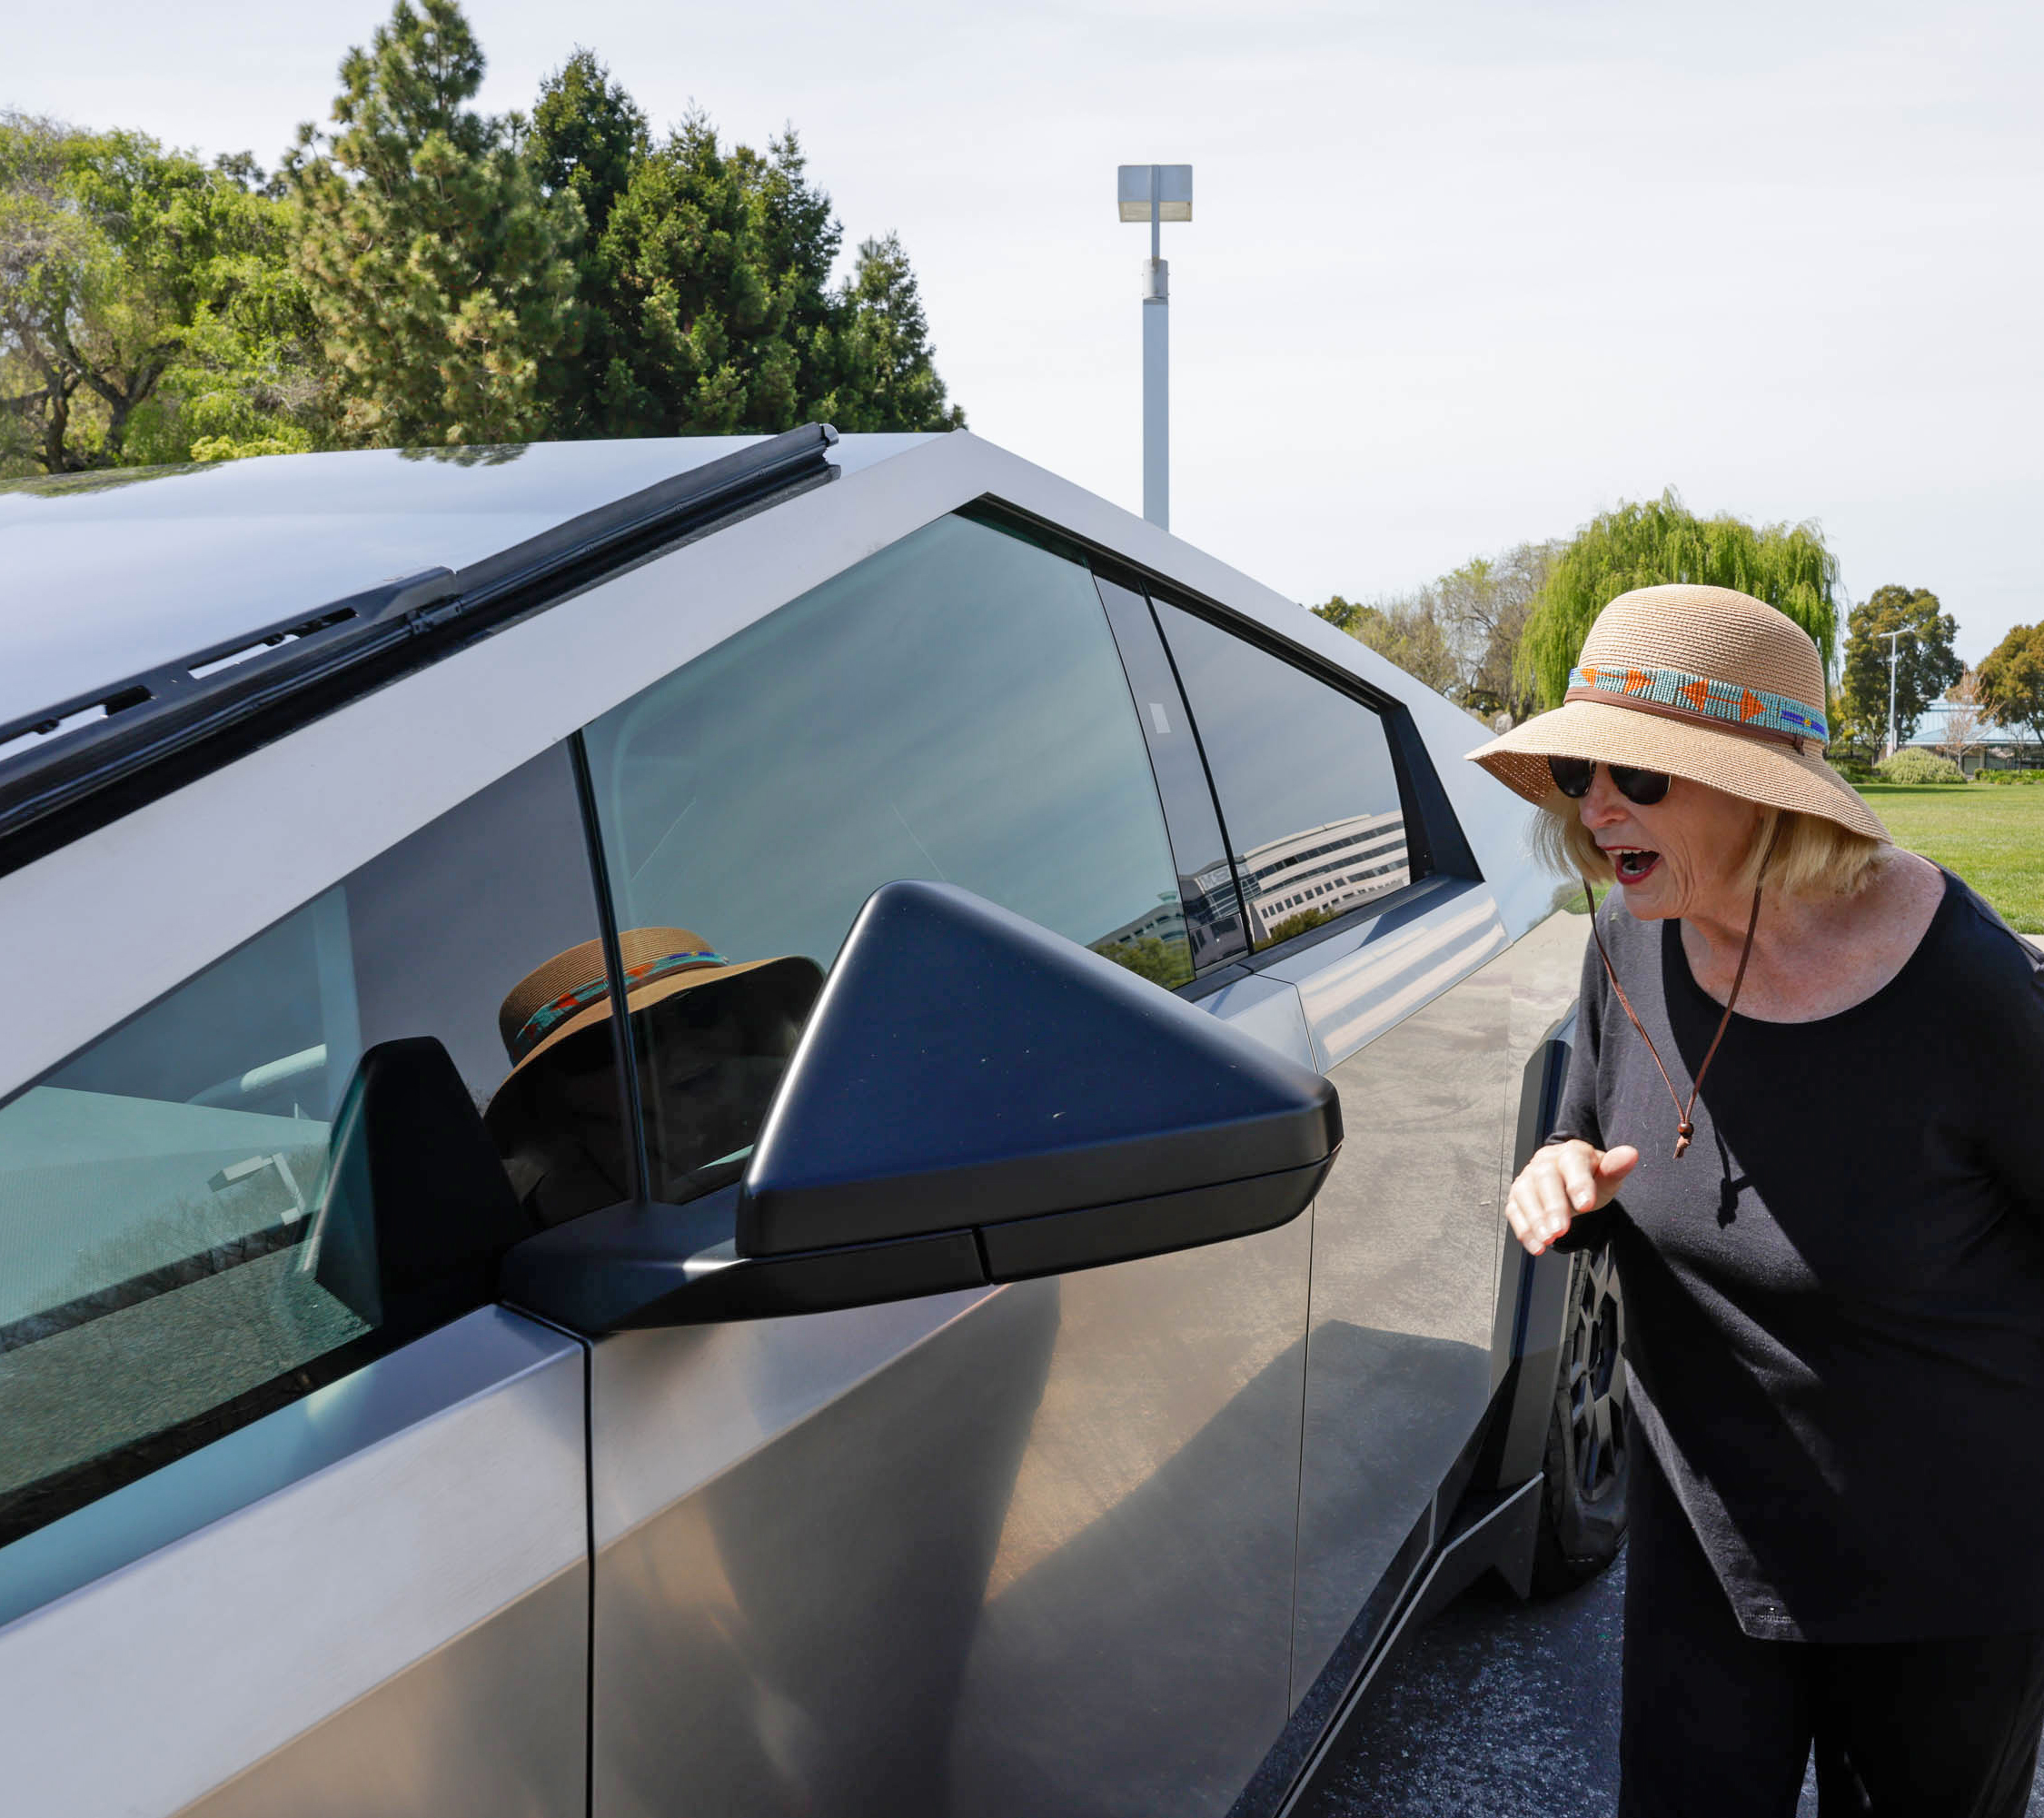 A surprised woman is looking at a futuristic car with an angular design.